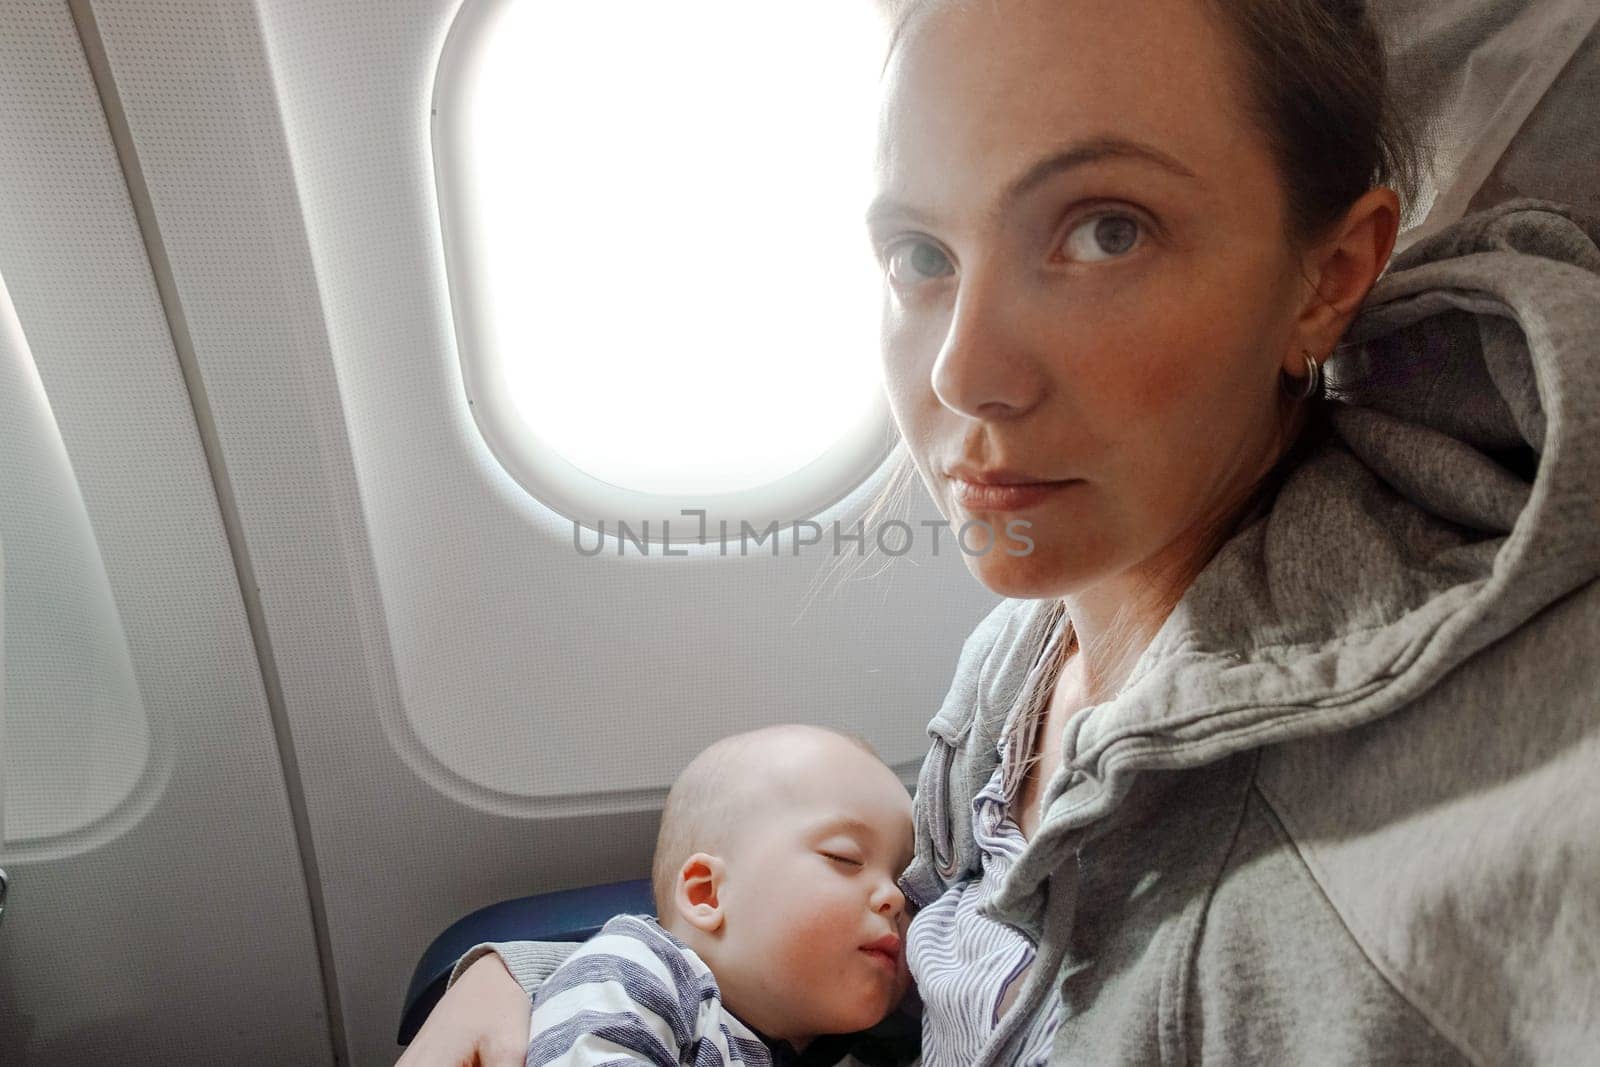 Baby is sleeping in plane with mom in her arms by Demkat